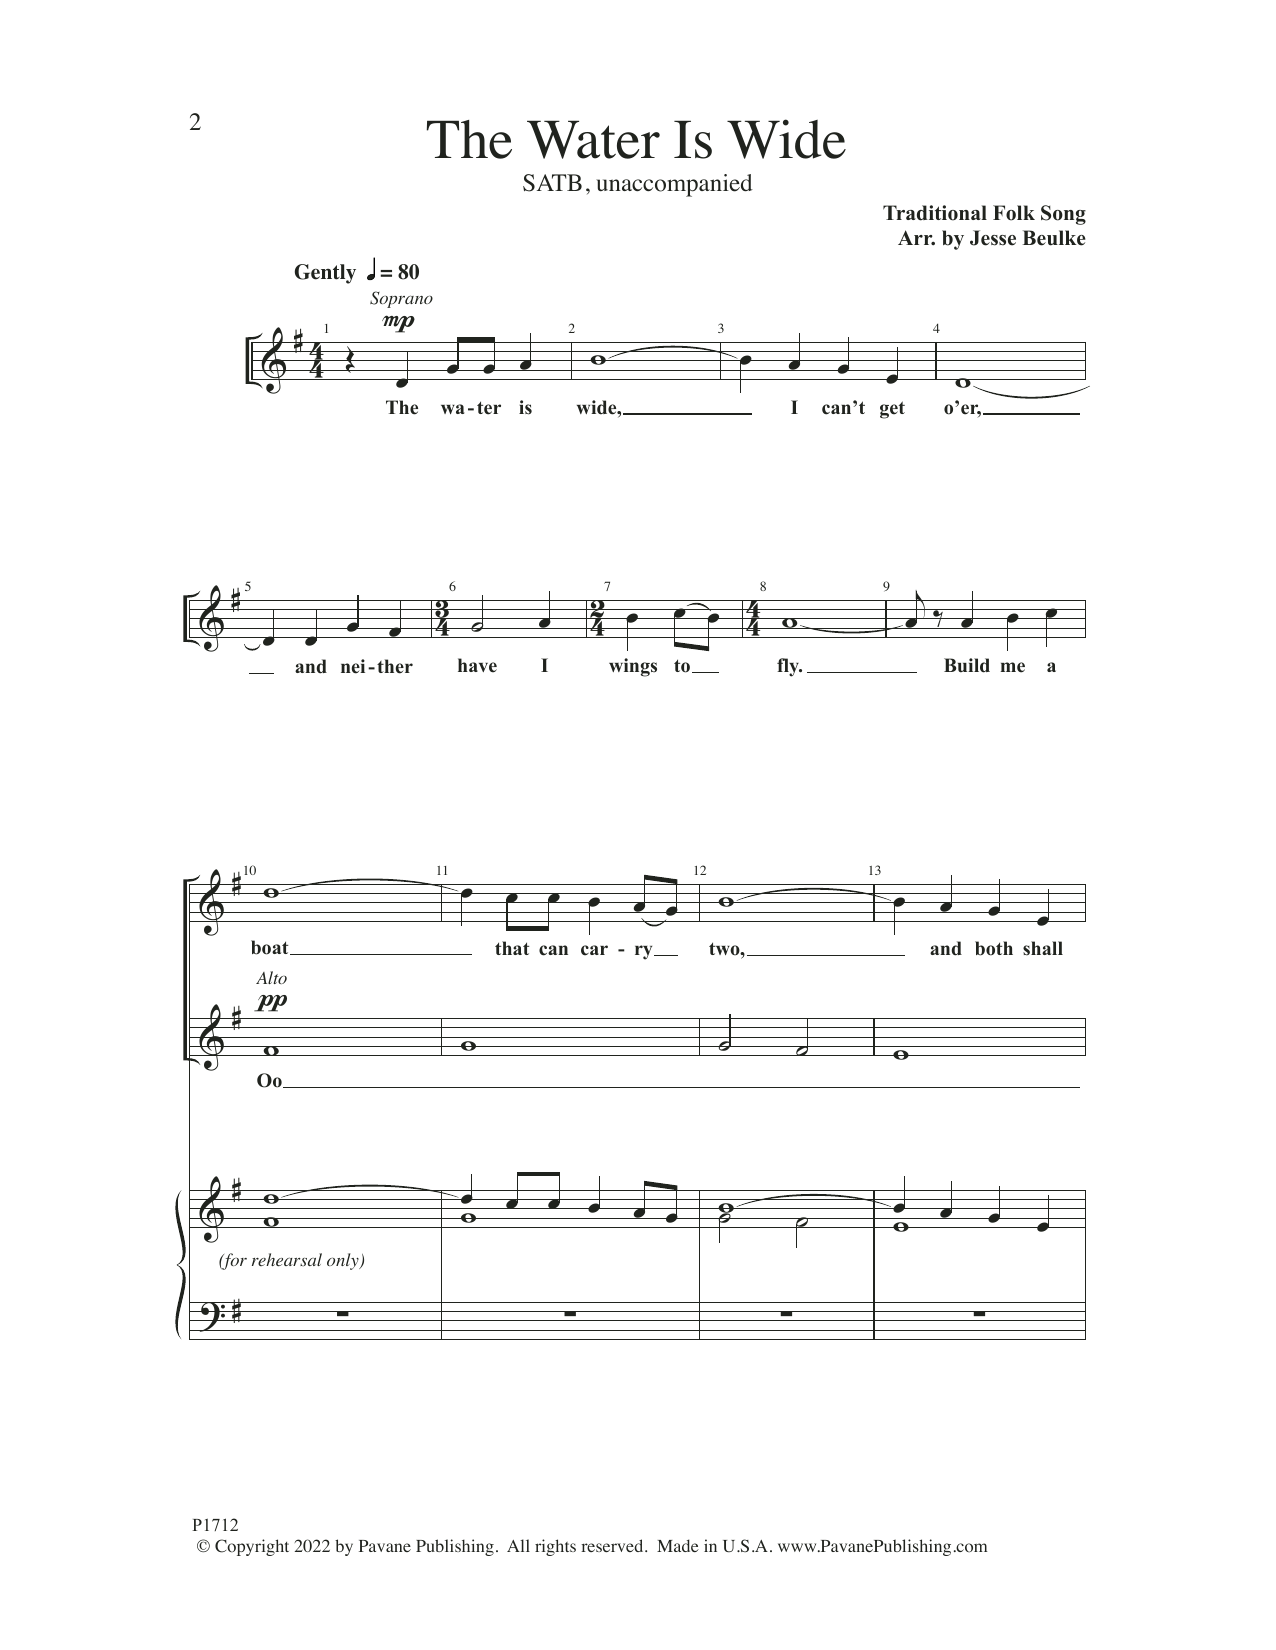 Download Traditional Folk Song The Water Is Wide (arr. Jesse Beulke) Sheet Music